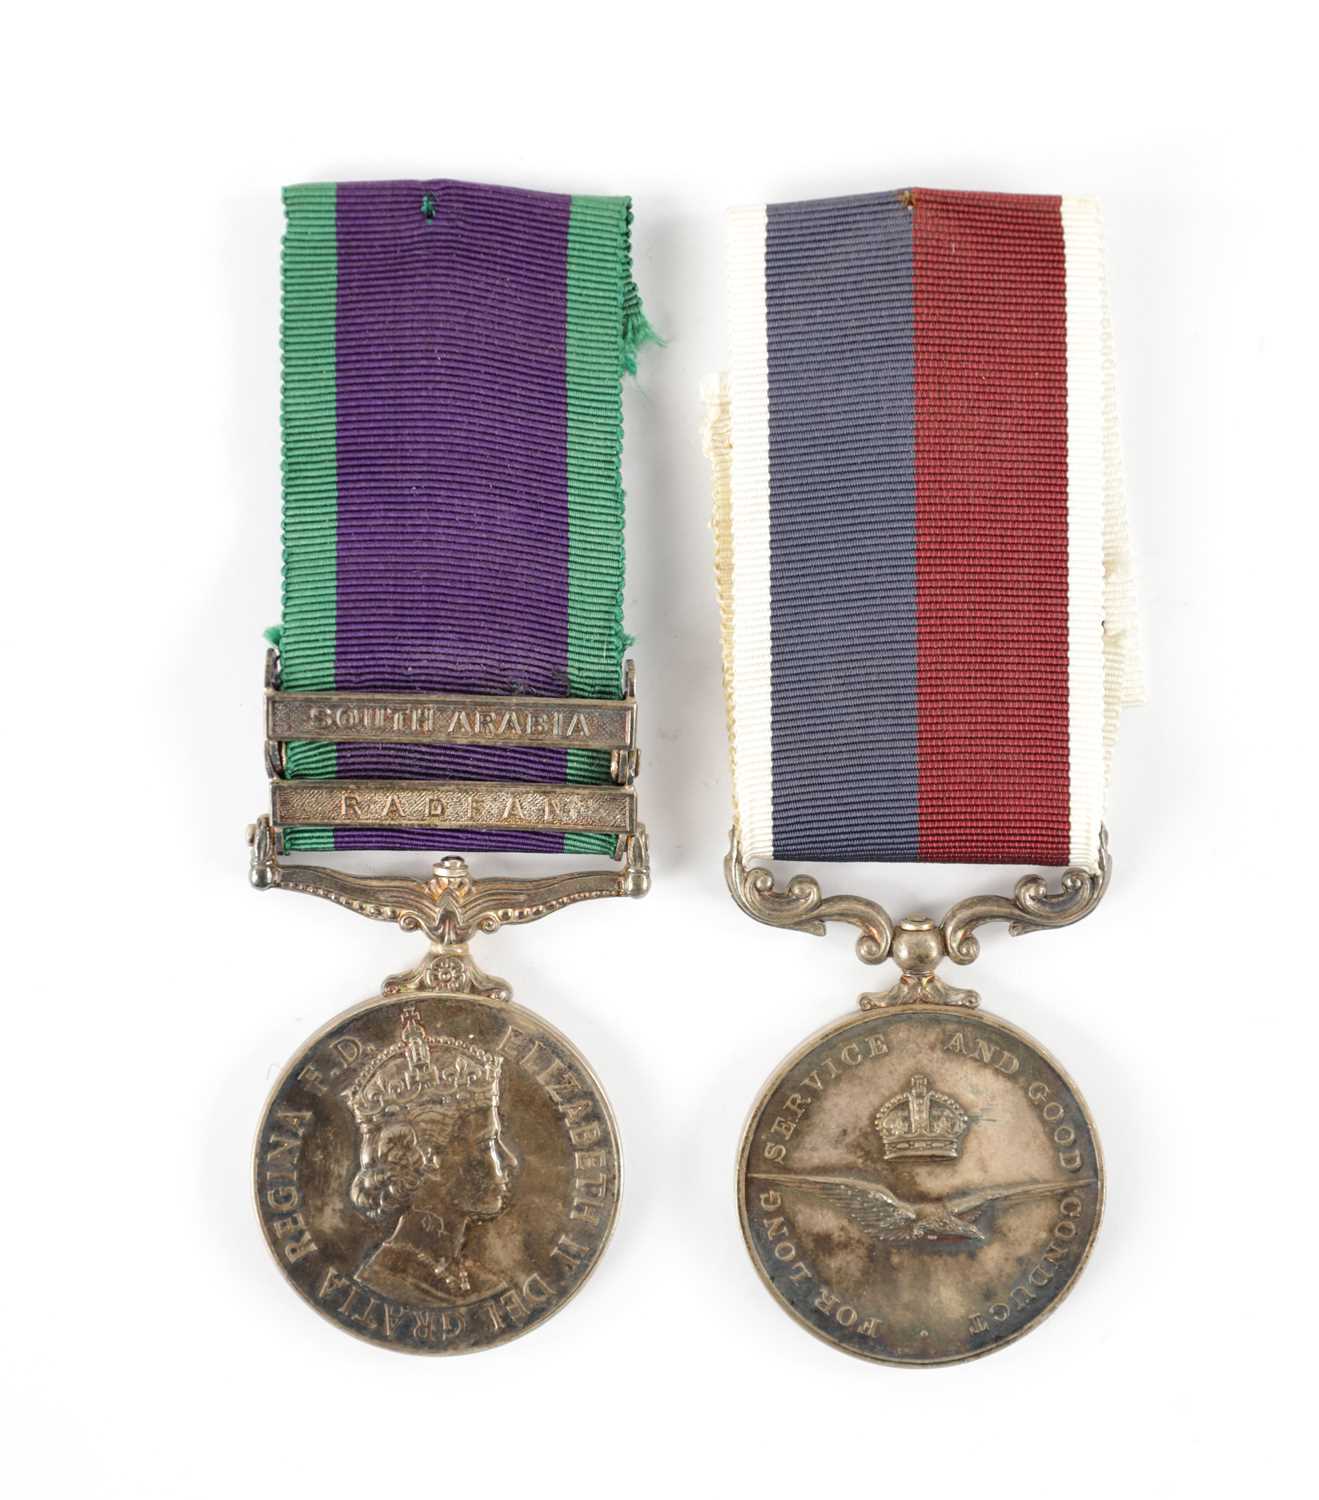 A PAIR OF ROYAL AIR FORCE SERVICE MEDALS